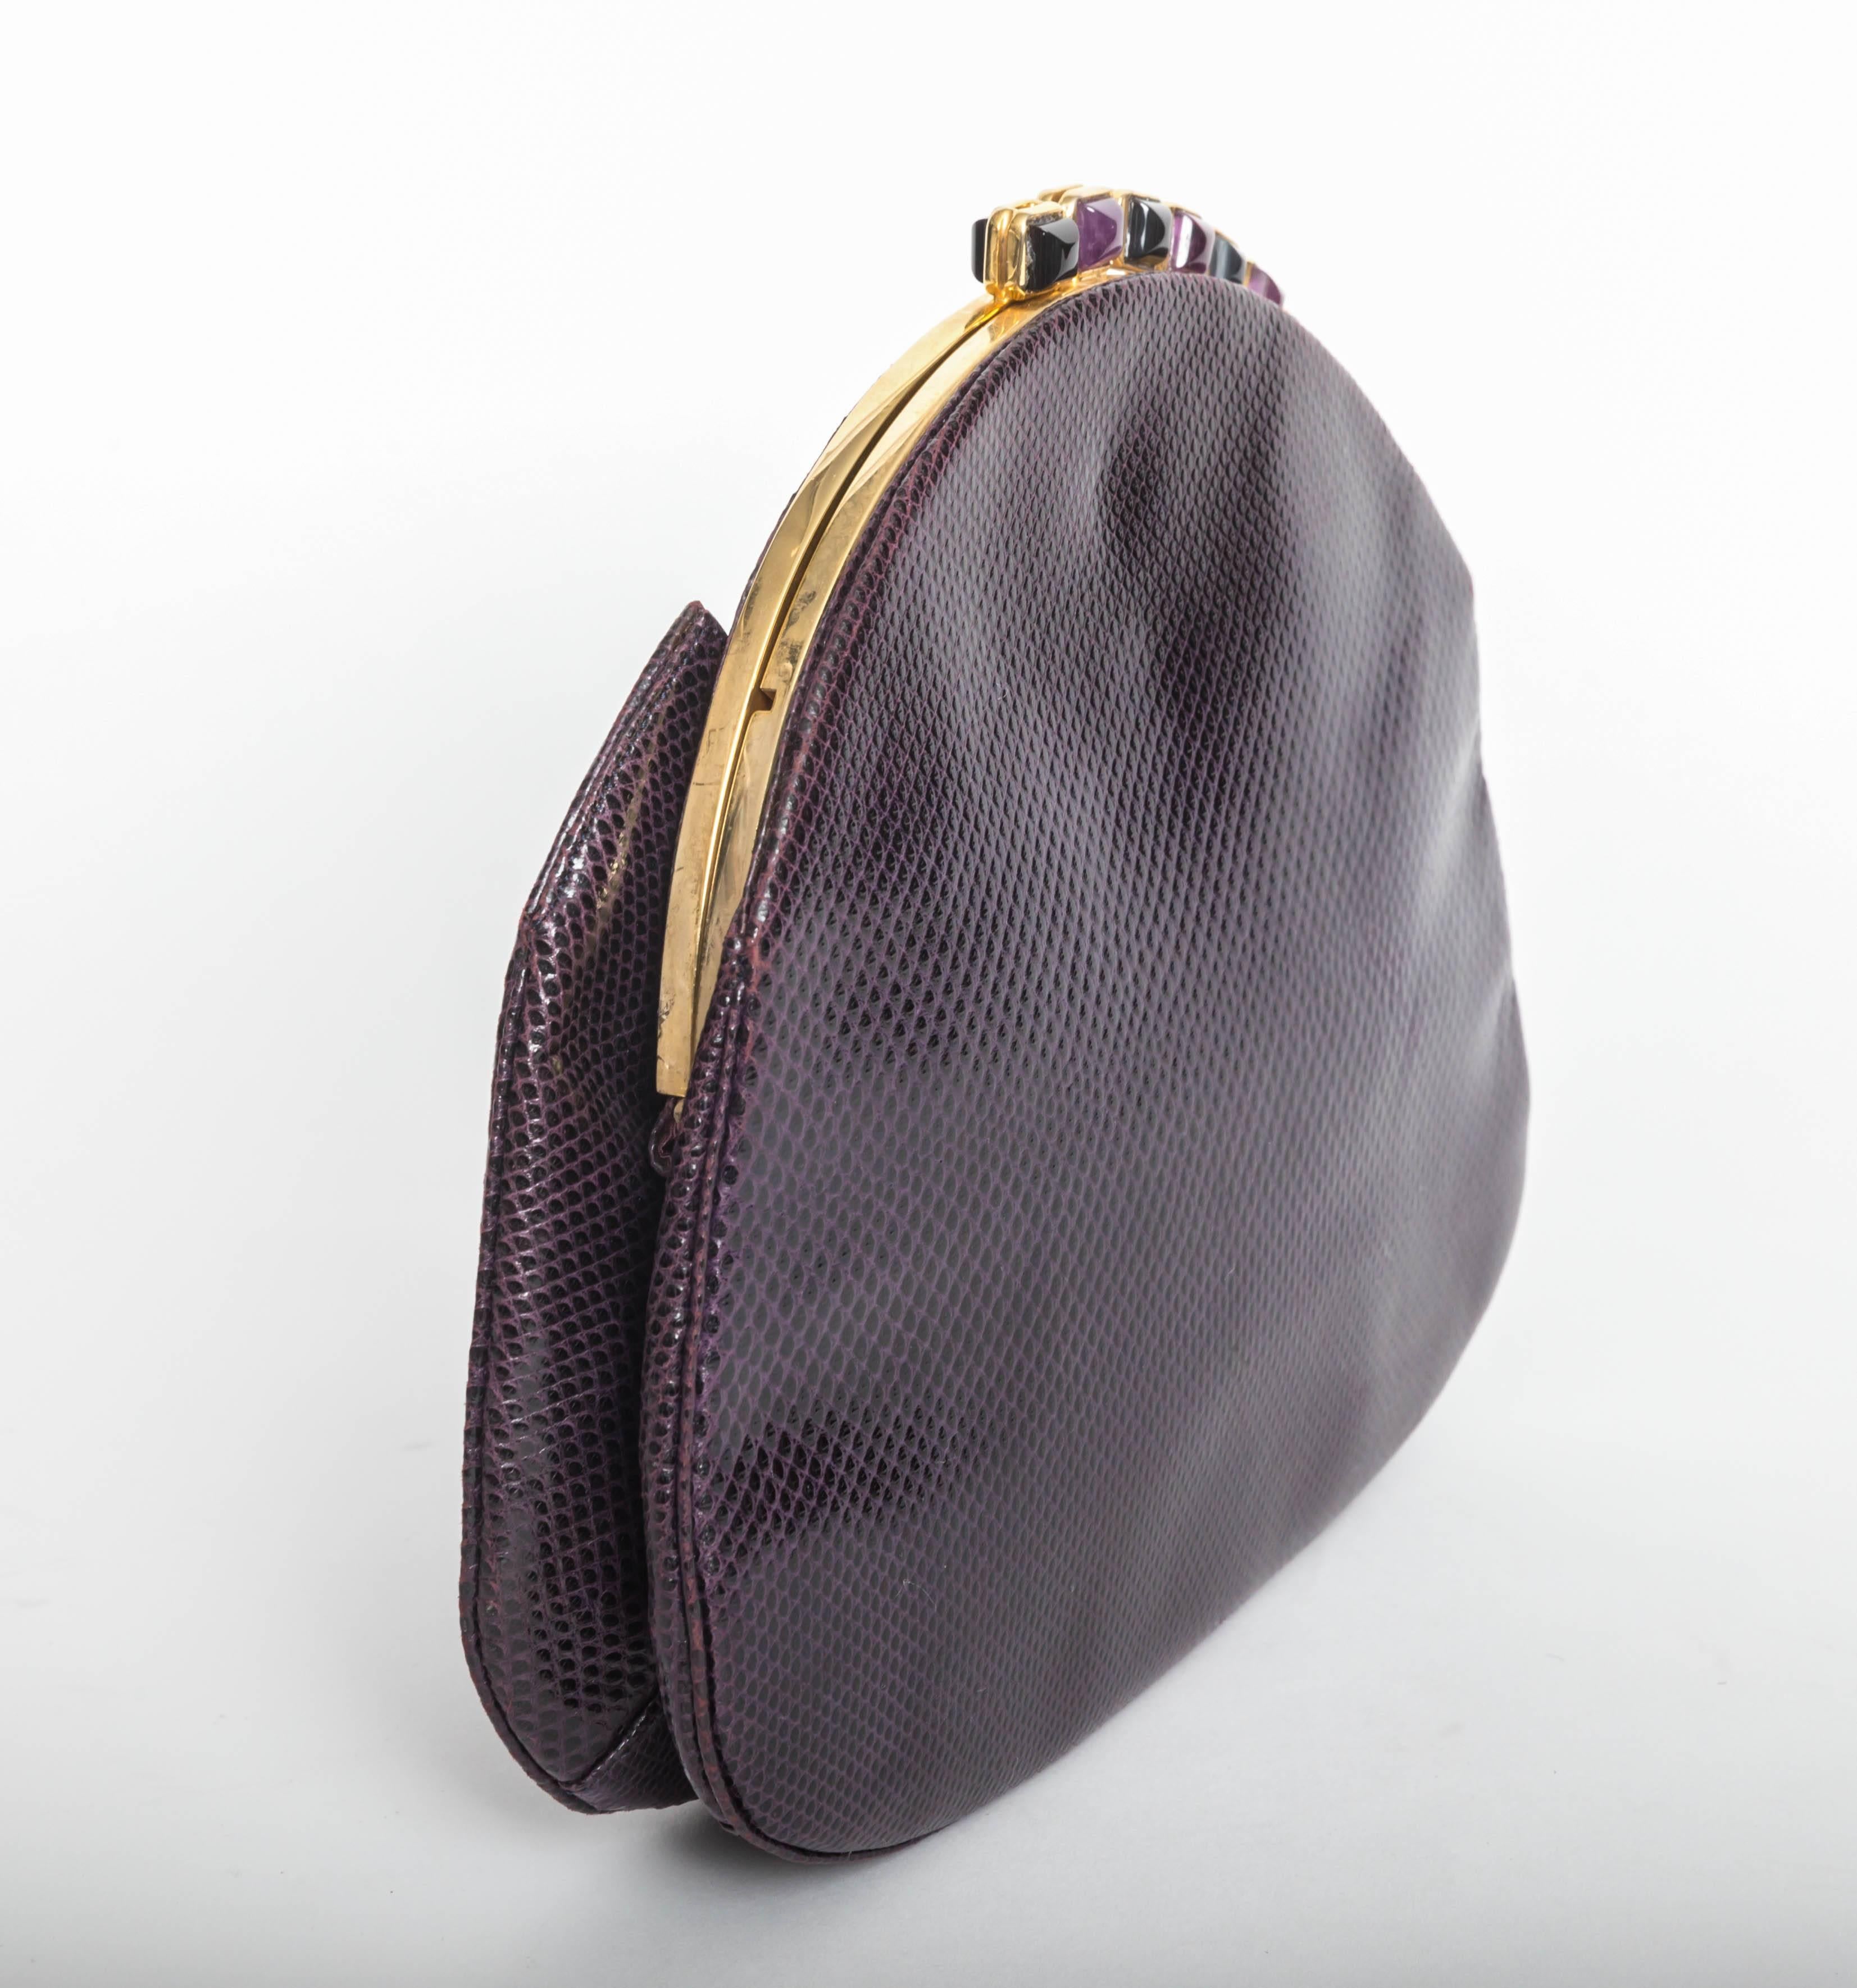 Gorgeous Judith Leiber eggplant clutch with gold chain shoulder strap.
Amethyst and onyx cabochons adorn the top of this bag.
Excellent condition.